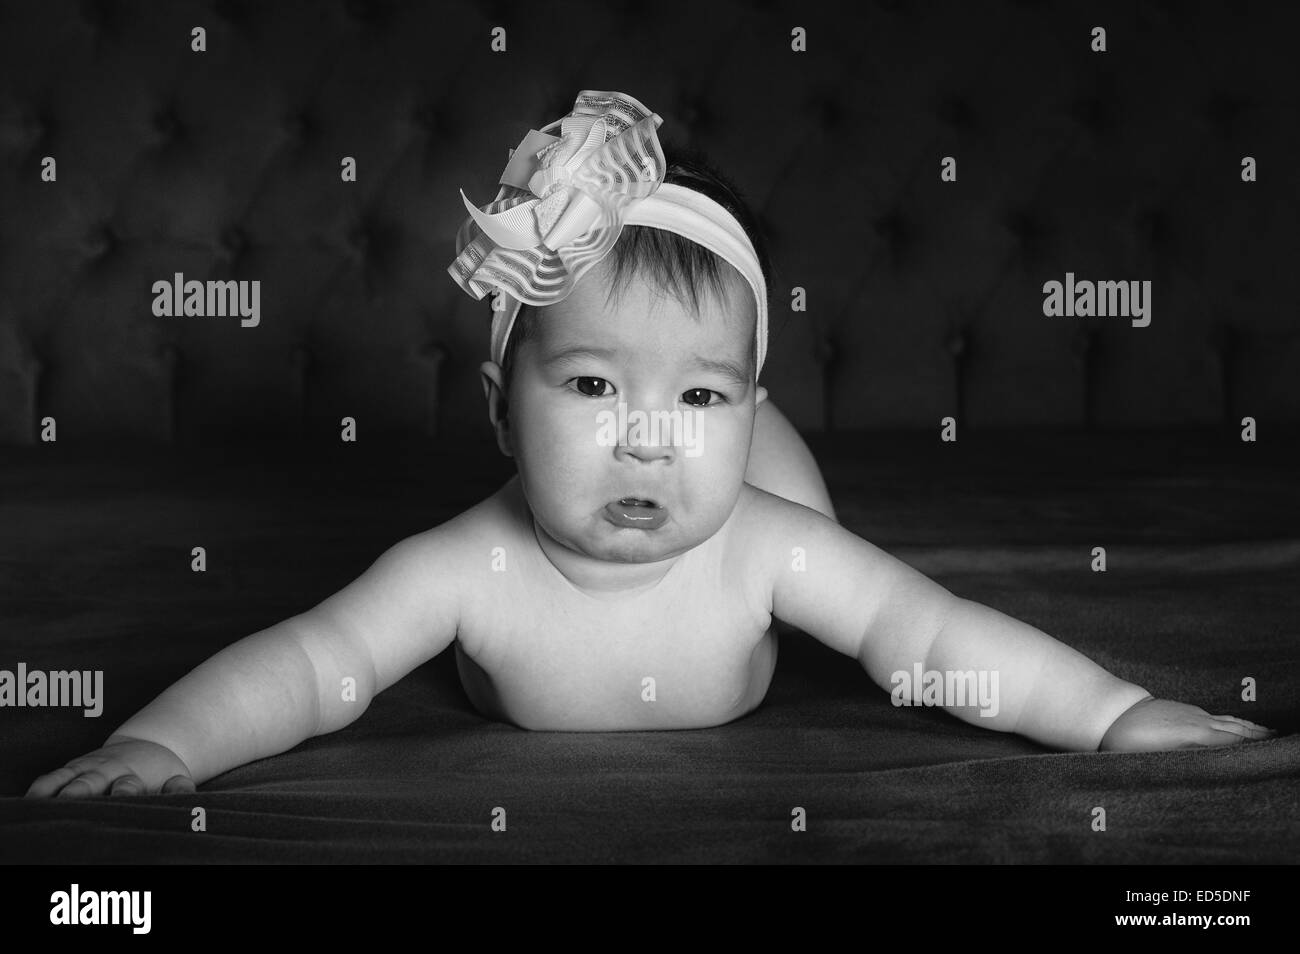 baby girl crying arms open on the bed black and white bw photo Stock Photo